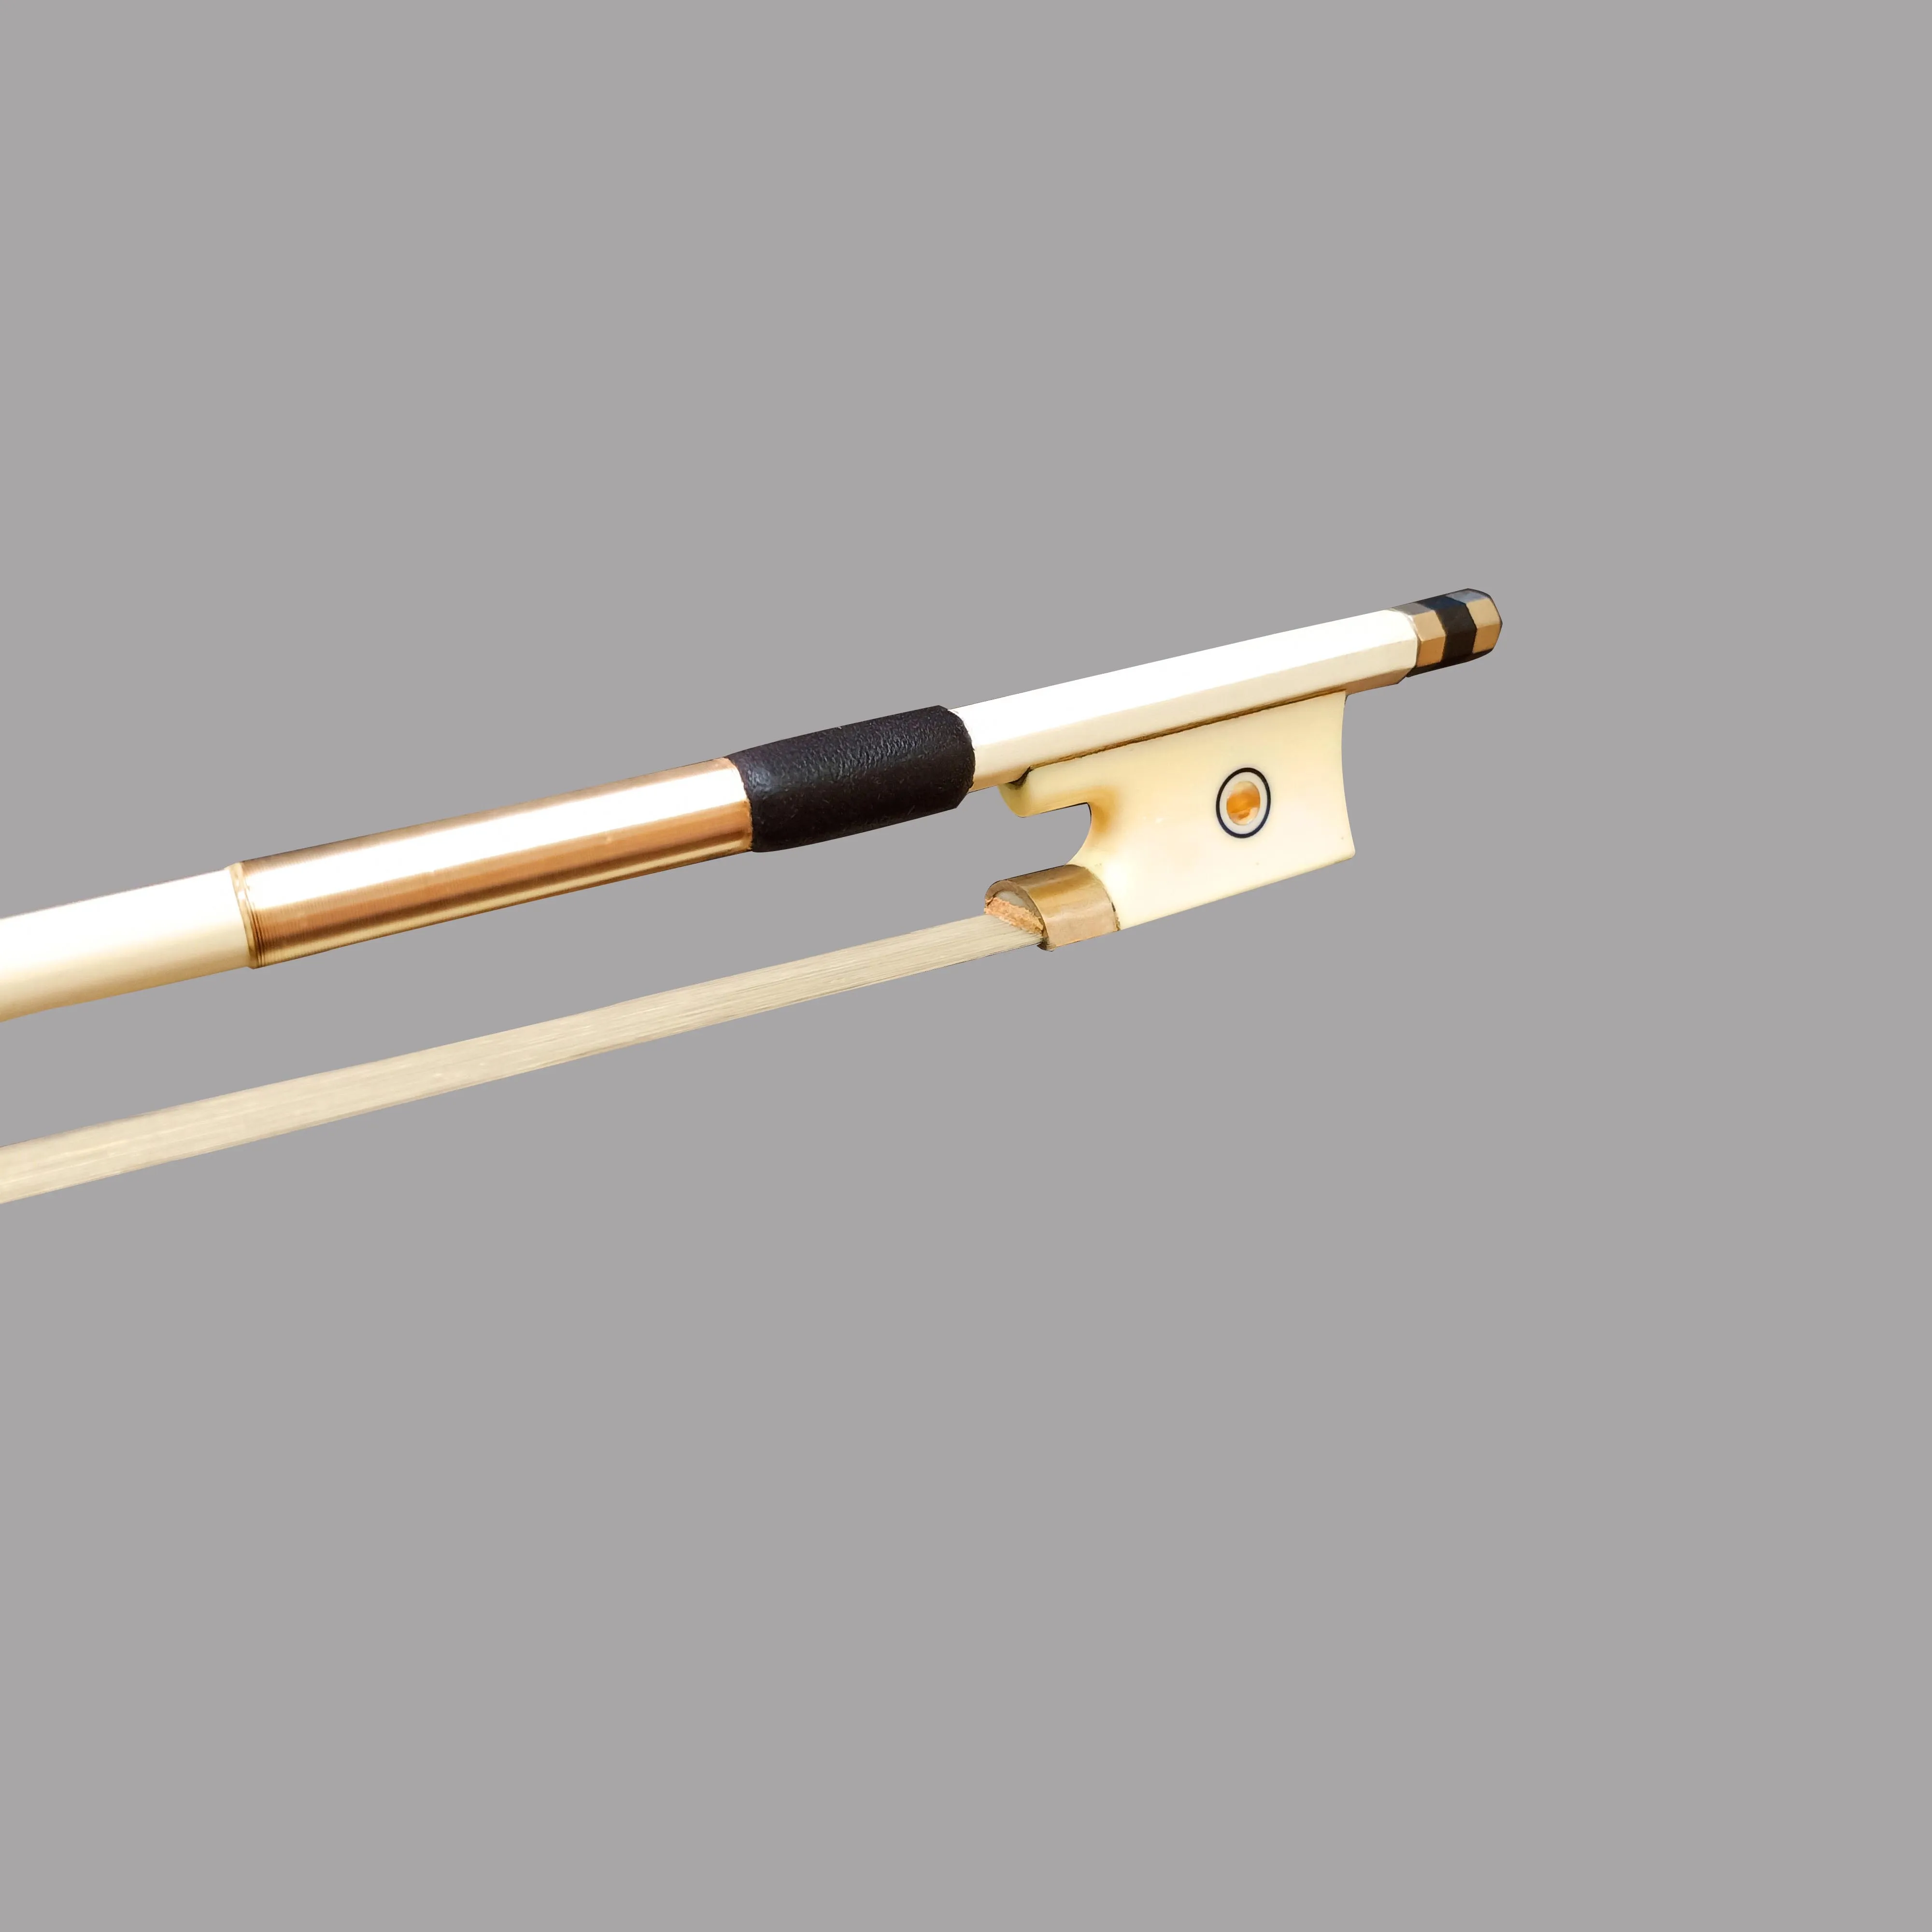 Freeshipping student fiddle bow white brazilwood round stick 4/4 violin bow violin part accessaries 3/4 1/2 1/4 1/8 1/10 1/16